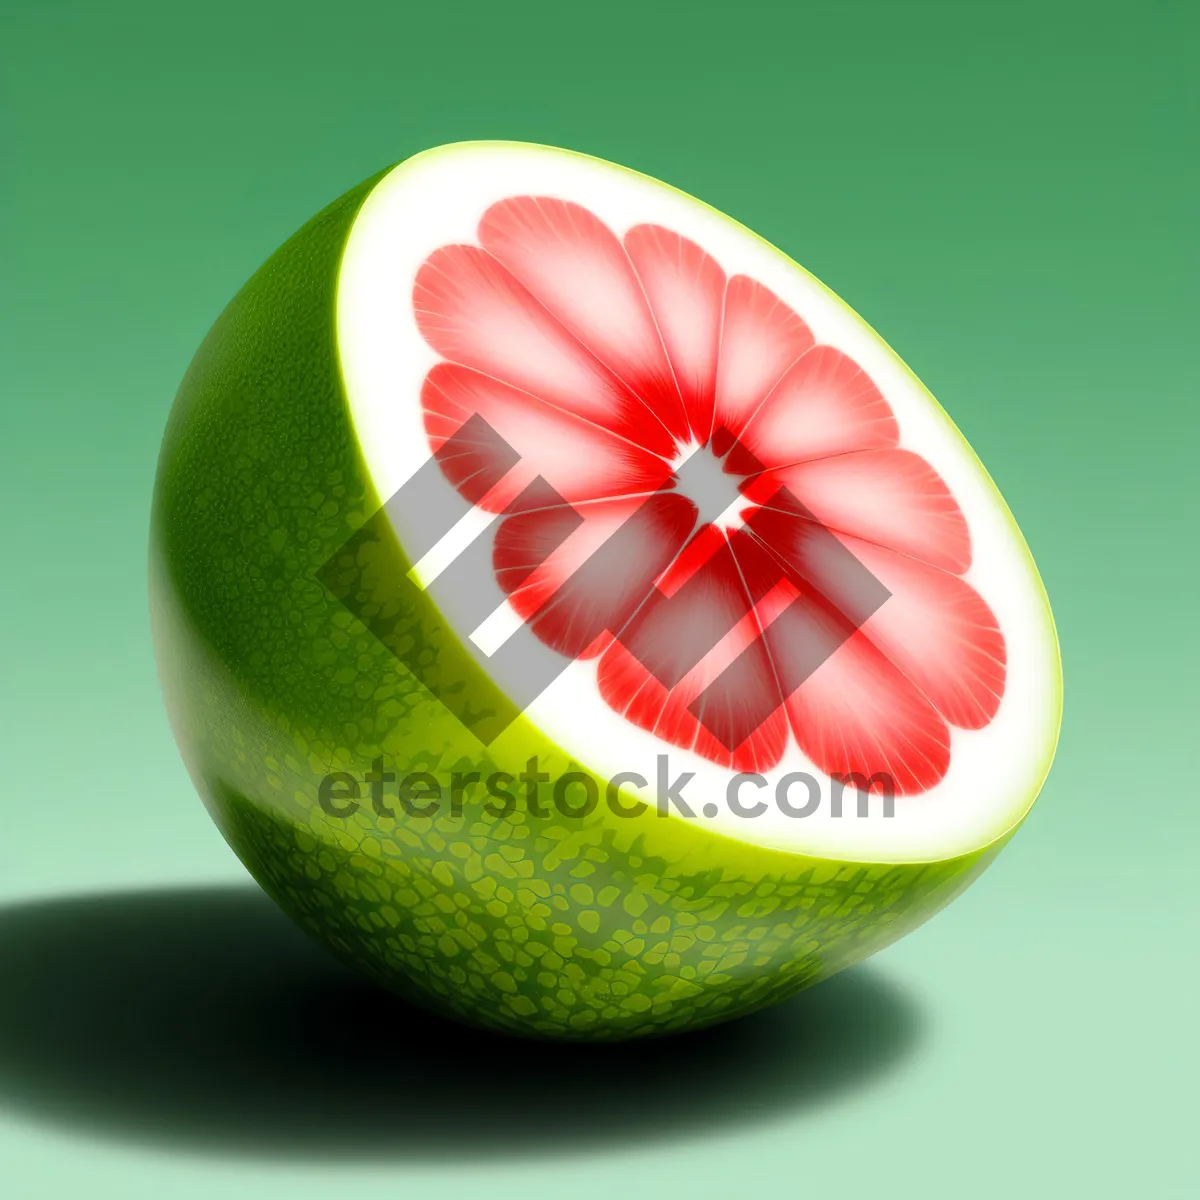 Picture of Fresh and Juicy Apple Slice - Healthy Fruit Snack